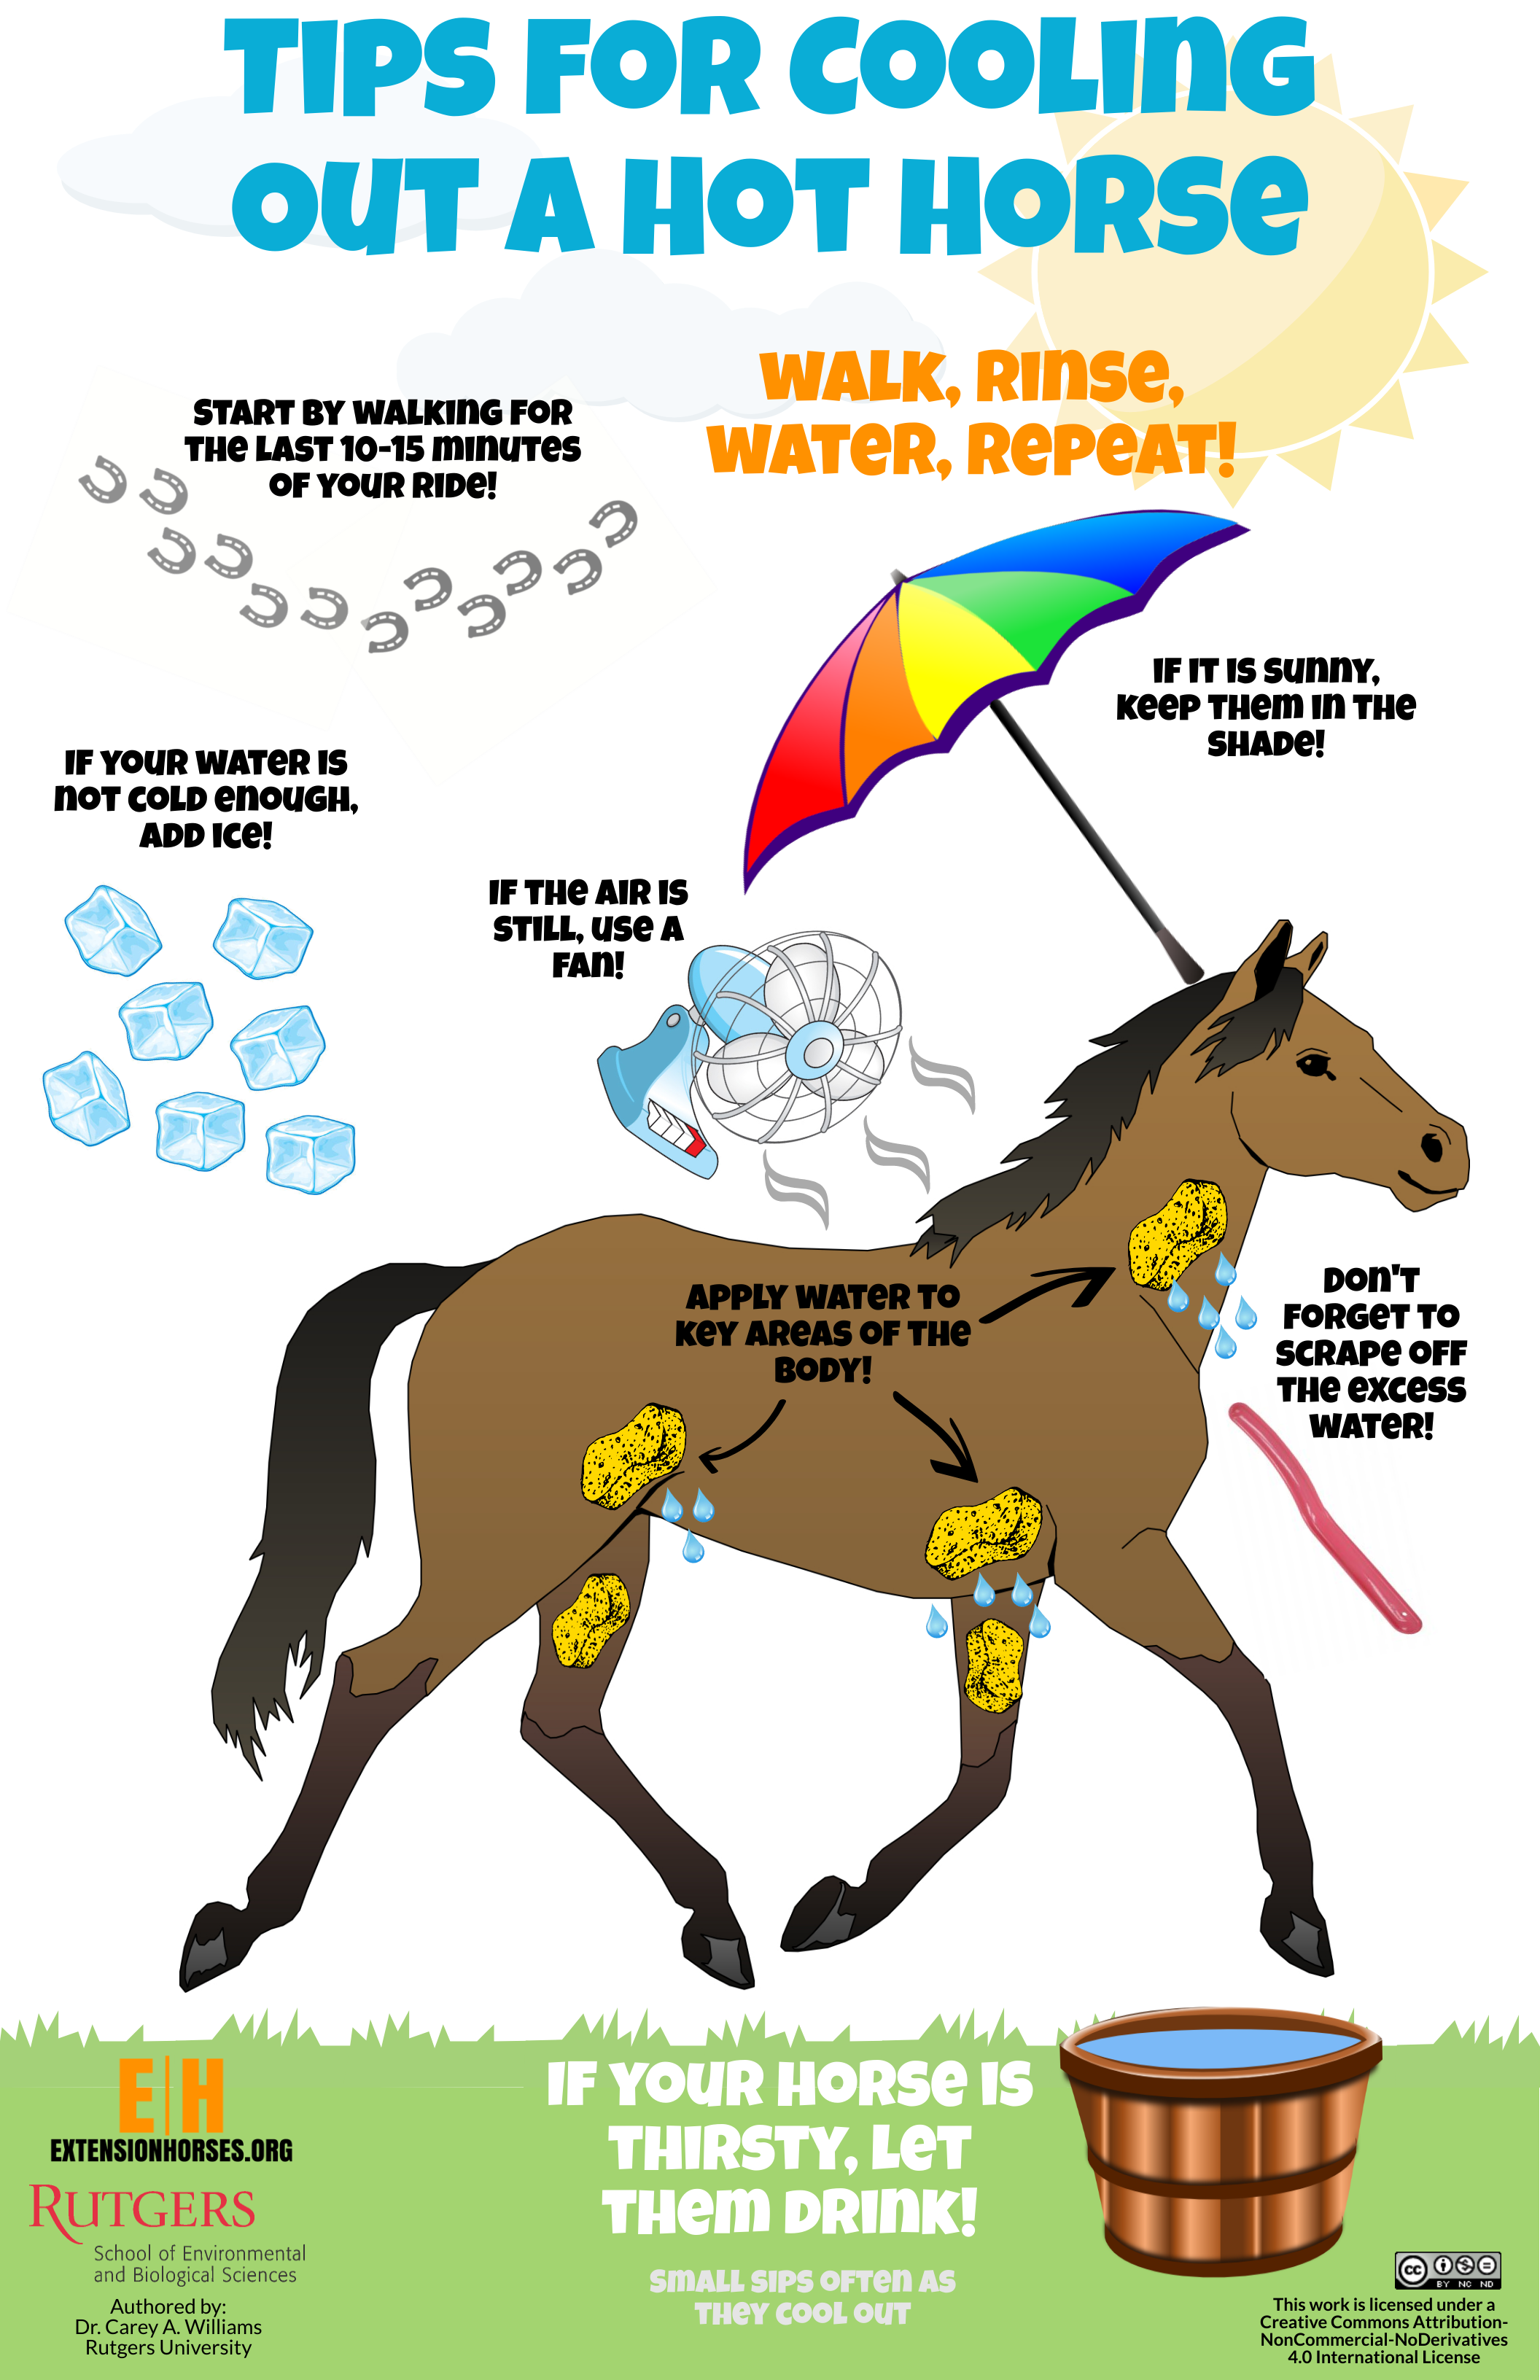 Tips for Cooling Out a Hot Horse